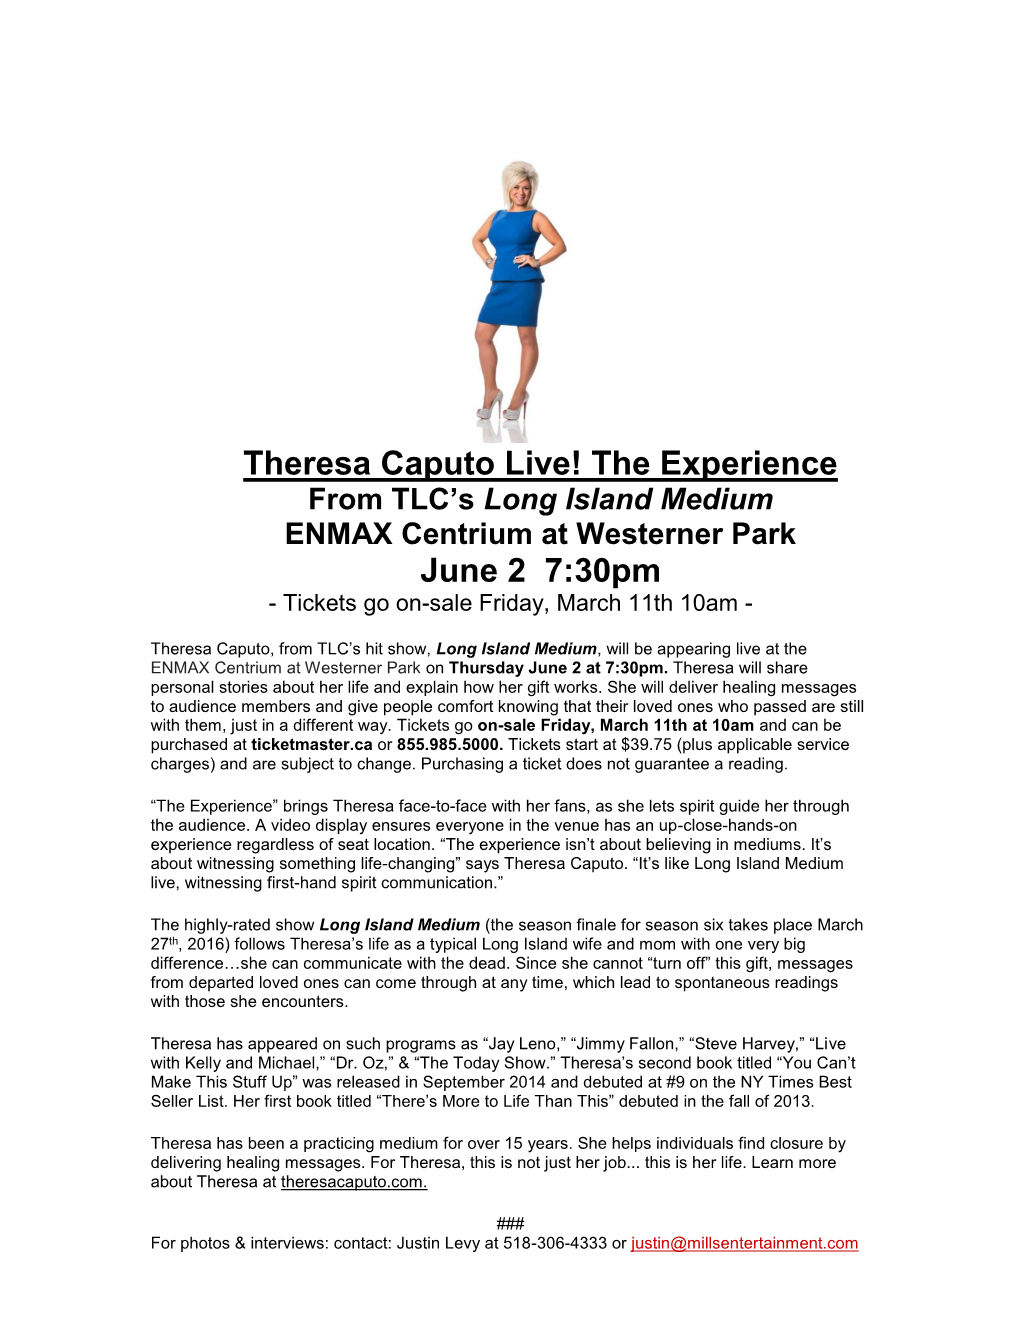 Theresa Caputo Live! the Experience from TLC’S Long Island Medium ENMAX Centrium at Westerner Park June 2 7:30Pm - Tickets Go On-Sale Friday, March 11Th 10Am